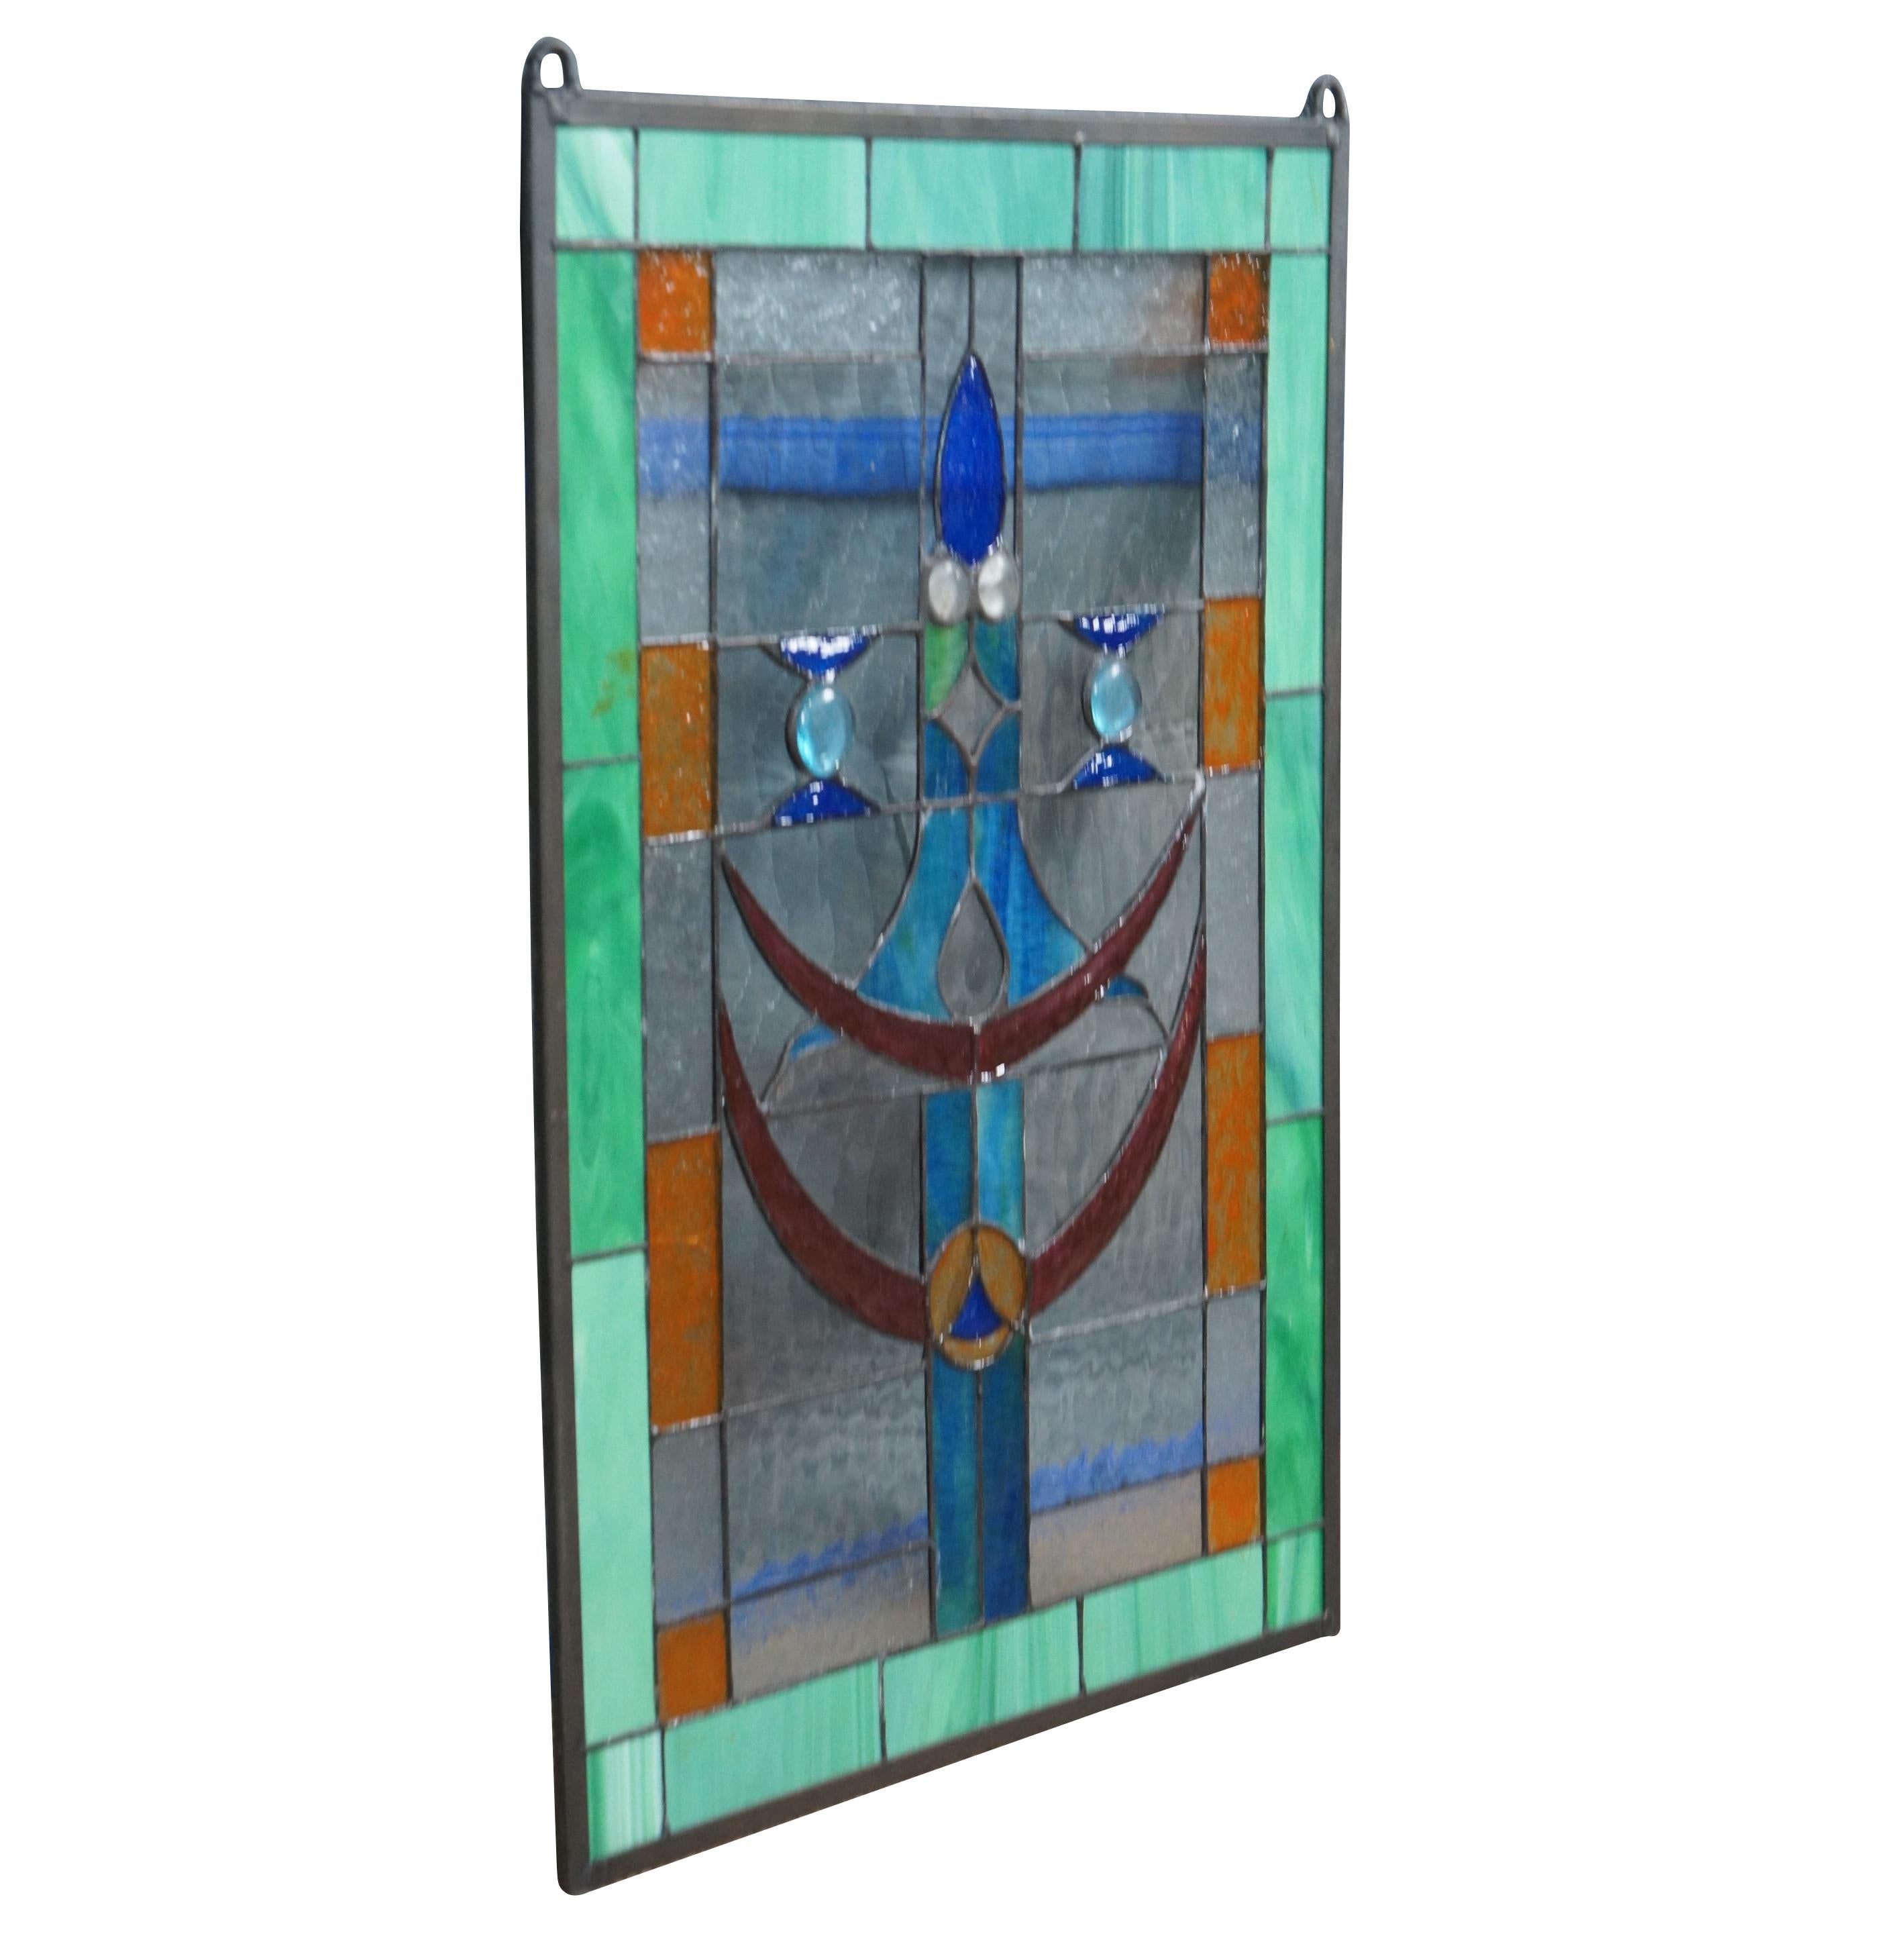 A beautiful leaded stained glass hanging panel. Features a Green border outside squares of amber, clear and a center of blues and ruby with beads. Elegant and clean lines will bring warmth to any room. Measure: 26